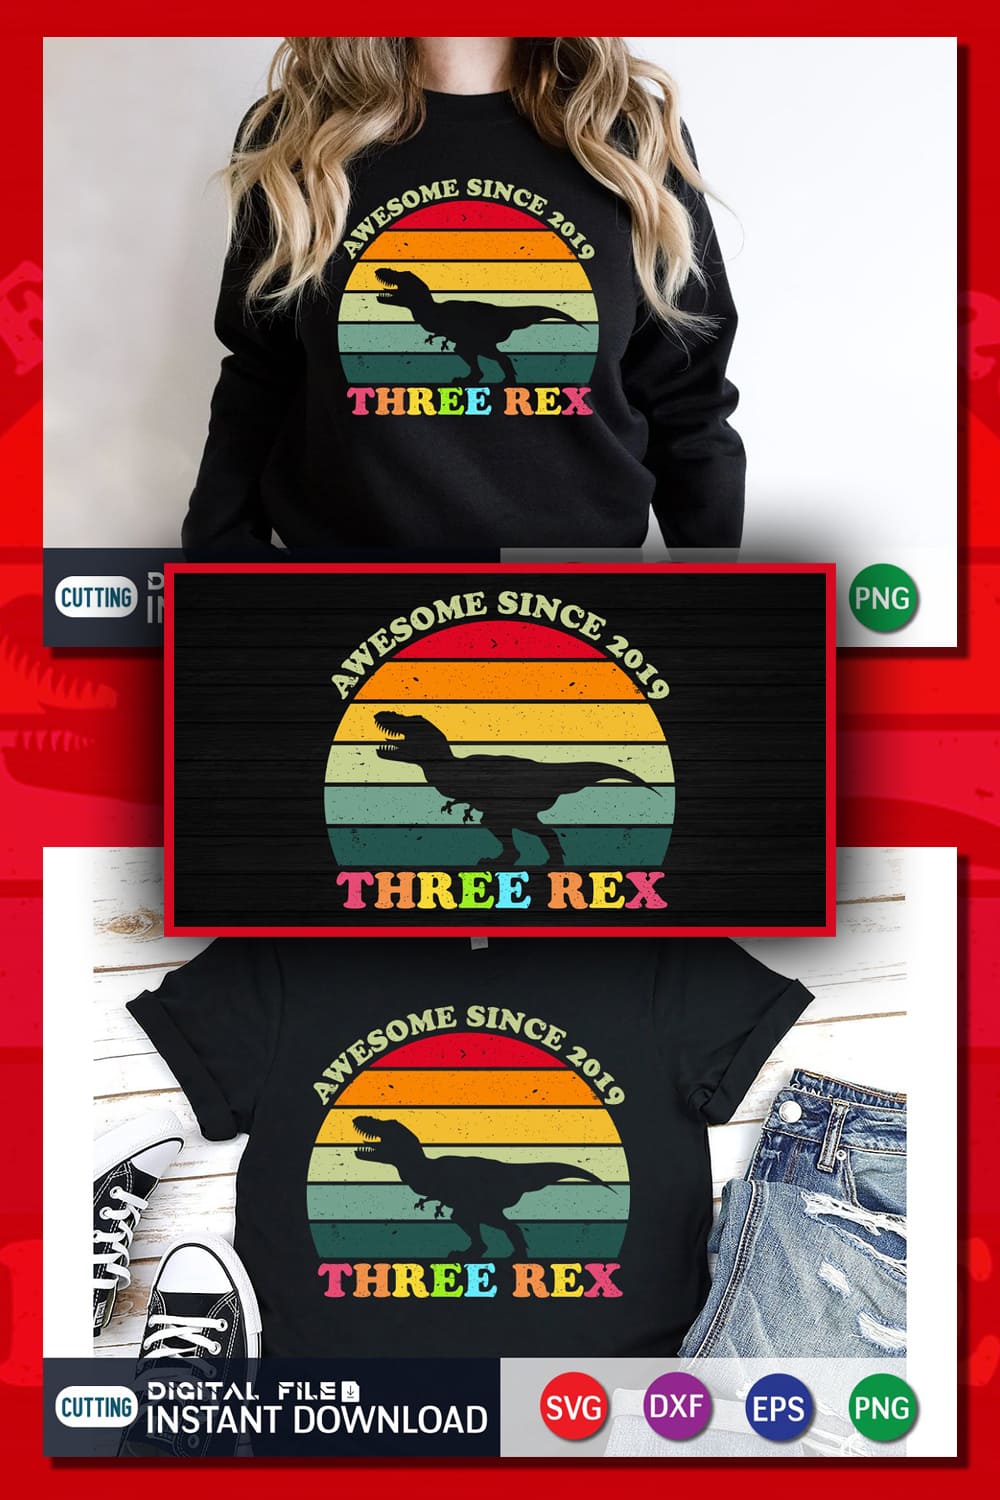 7534208 awesome since 2019 three rex svg pinterest 1000 1500 212